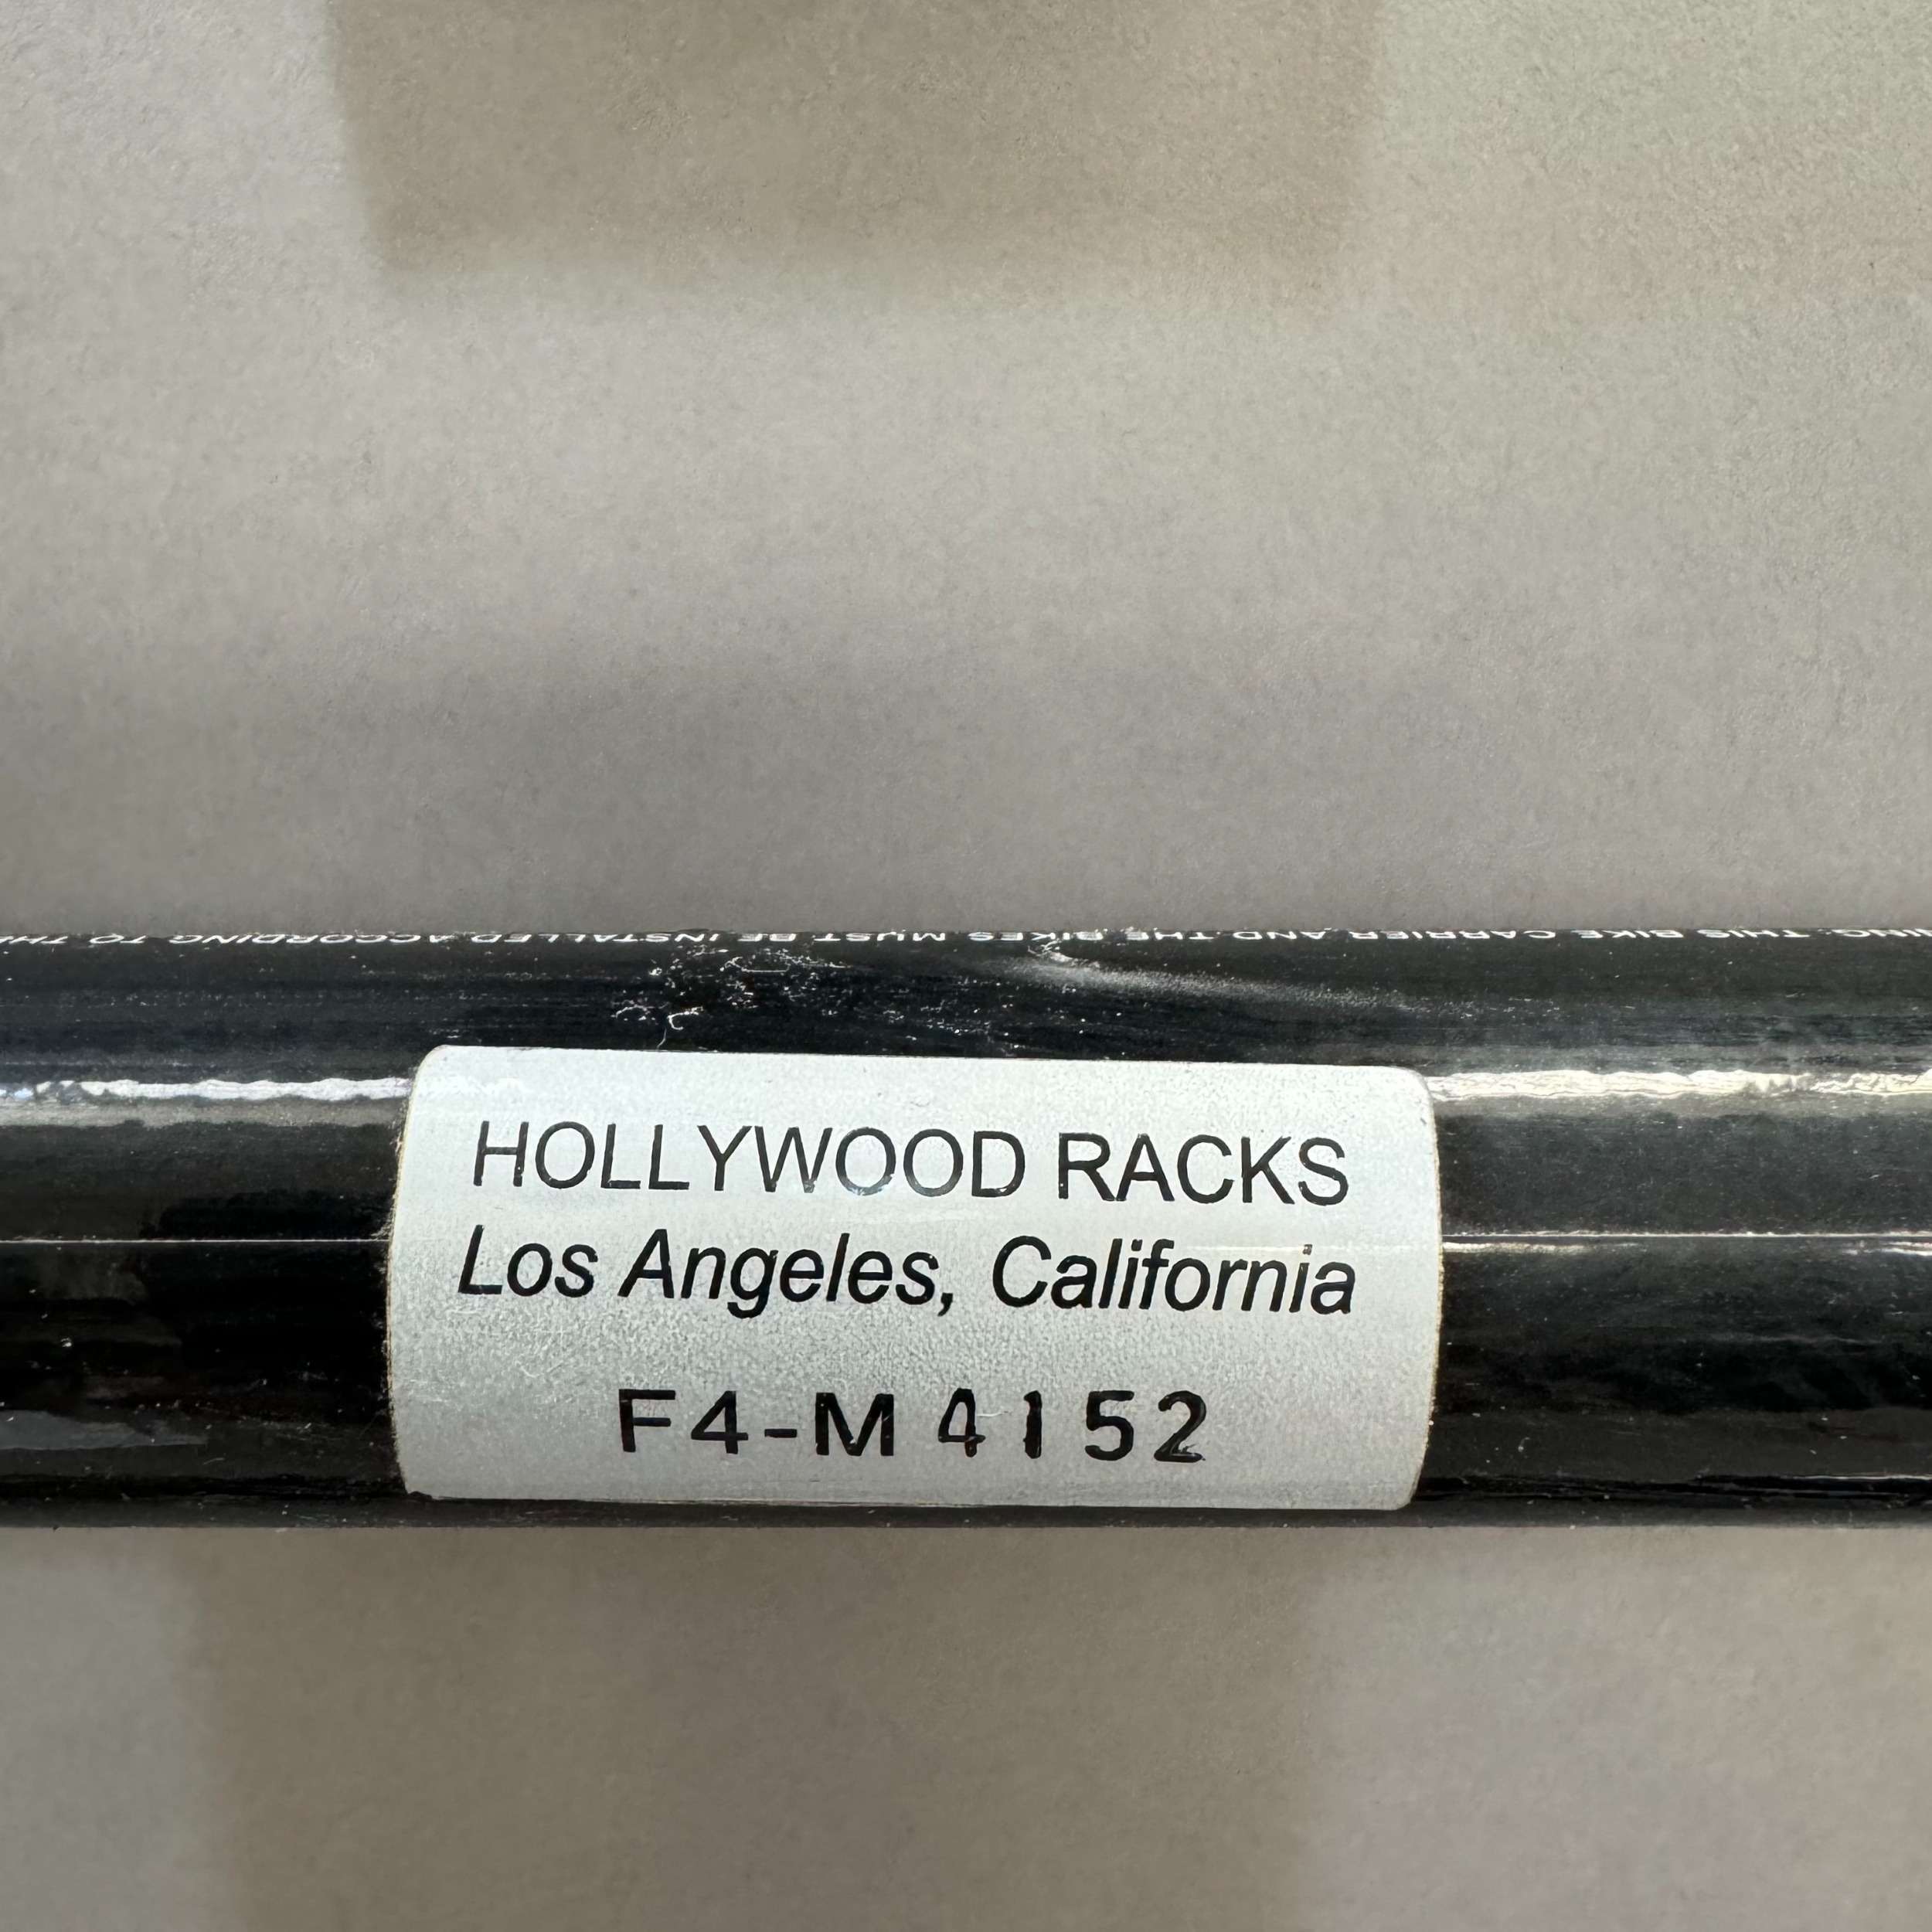 A Hollywood Racks bicycle carrier for the car with instructions - Image 3 of 3